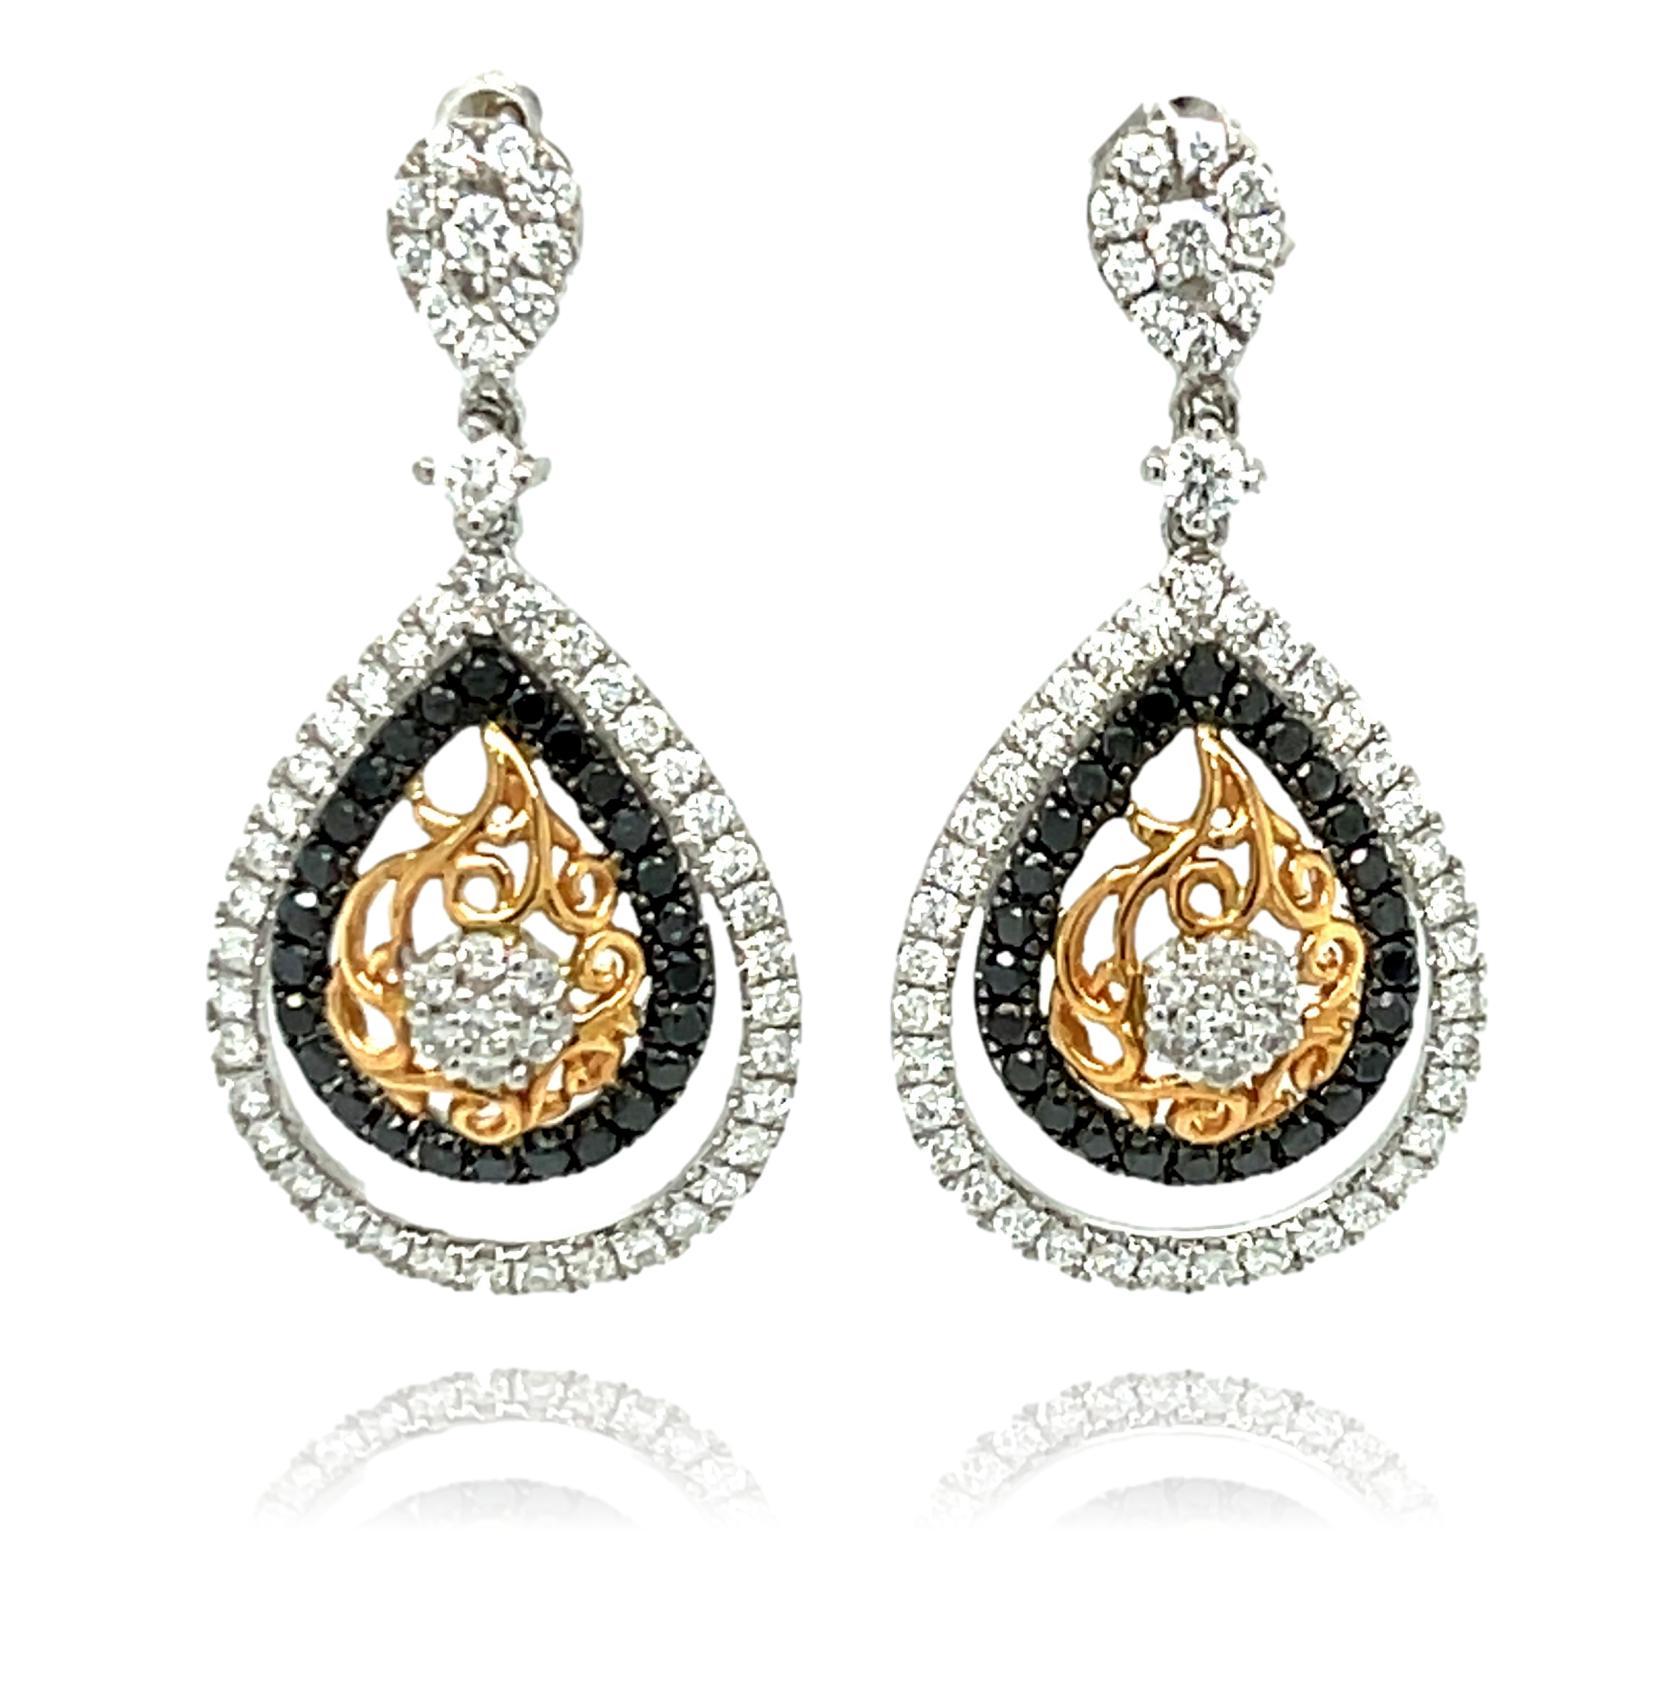 18K White and Rose Gold Dangling Diamond Earrings In New Condition For Sale In New York, NY